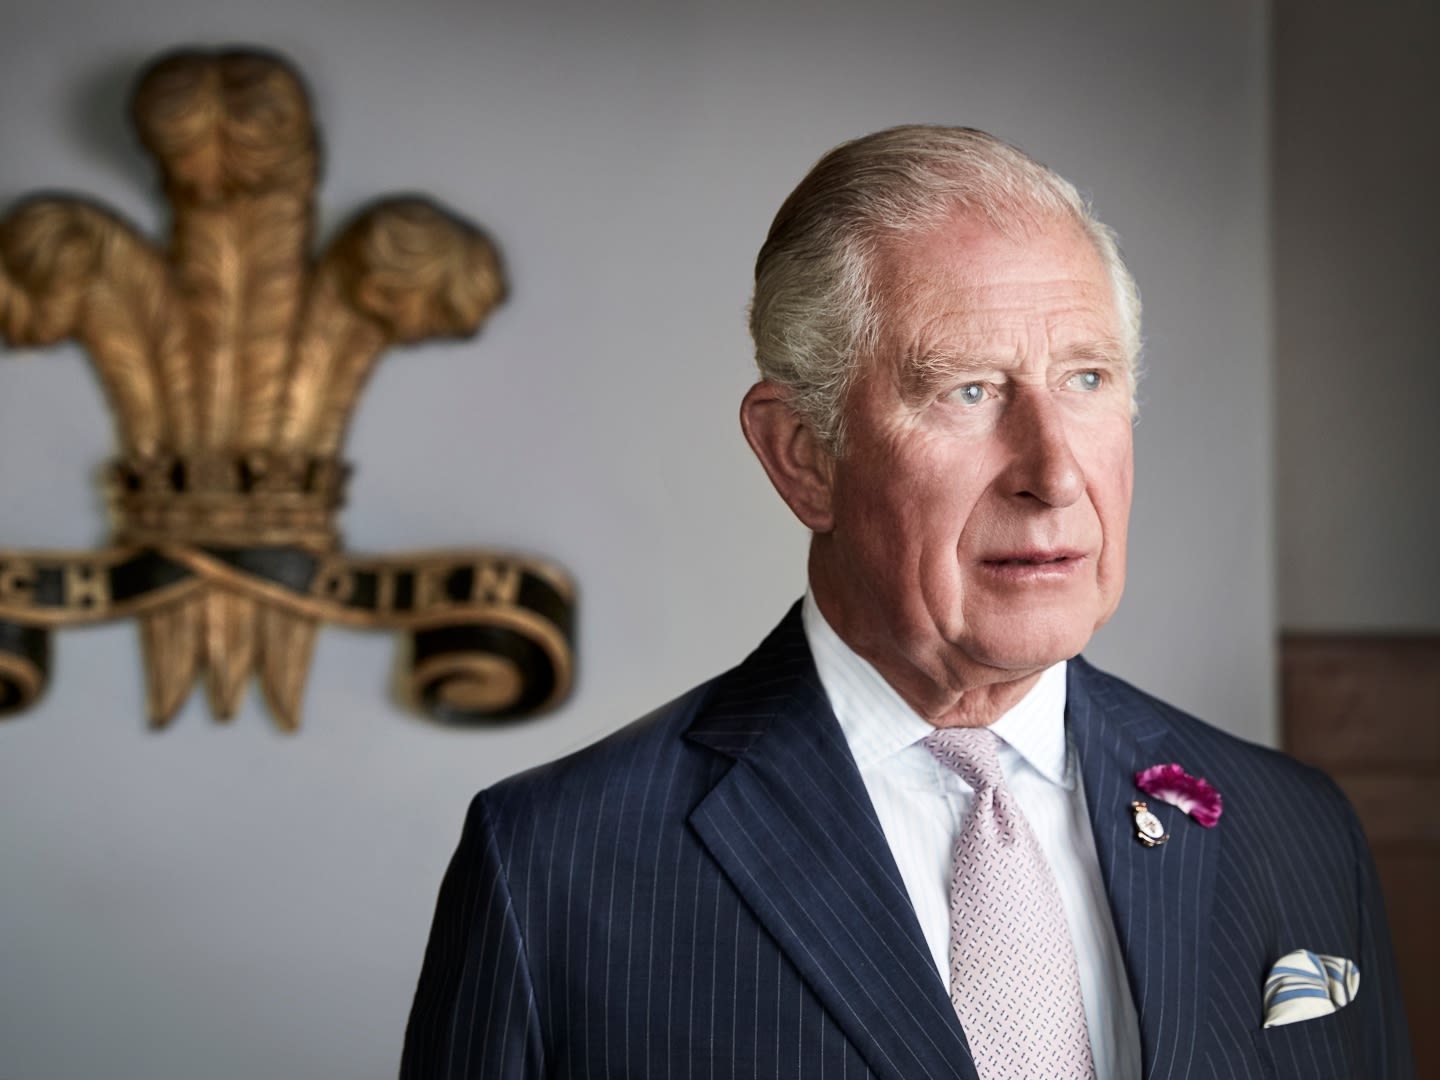 King Charles III Has Curiously Dipped His Toes Into the U.S. Real Estate Market